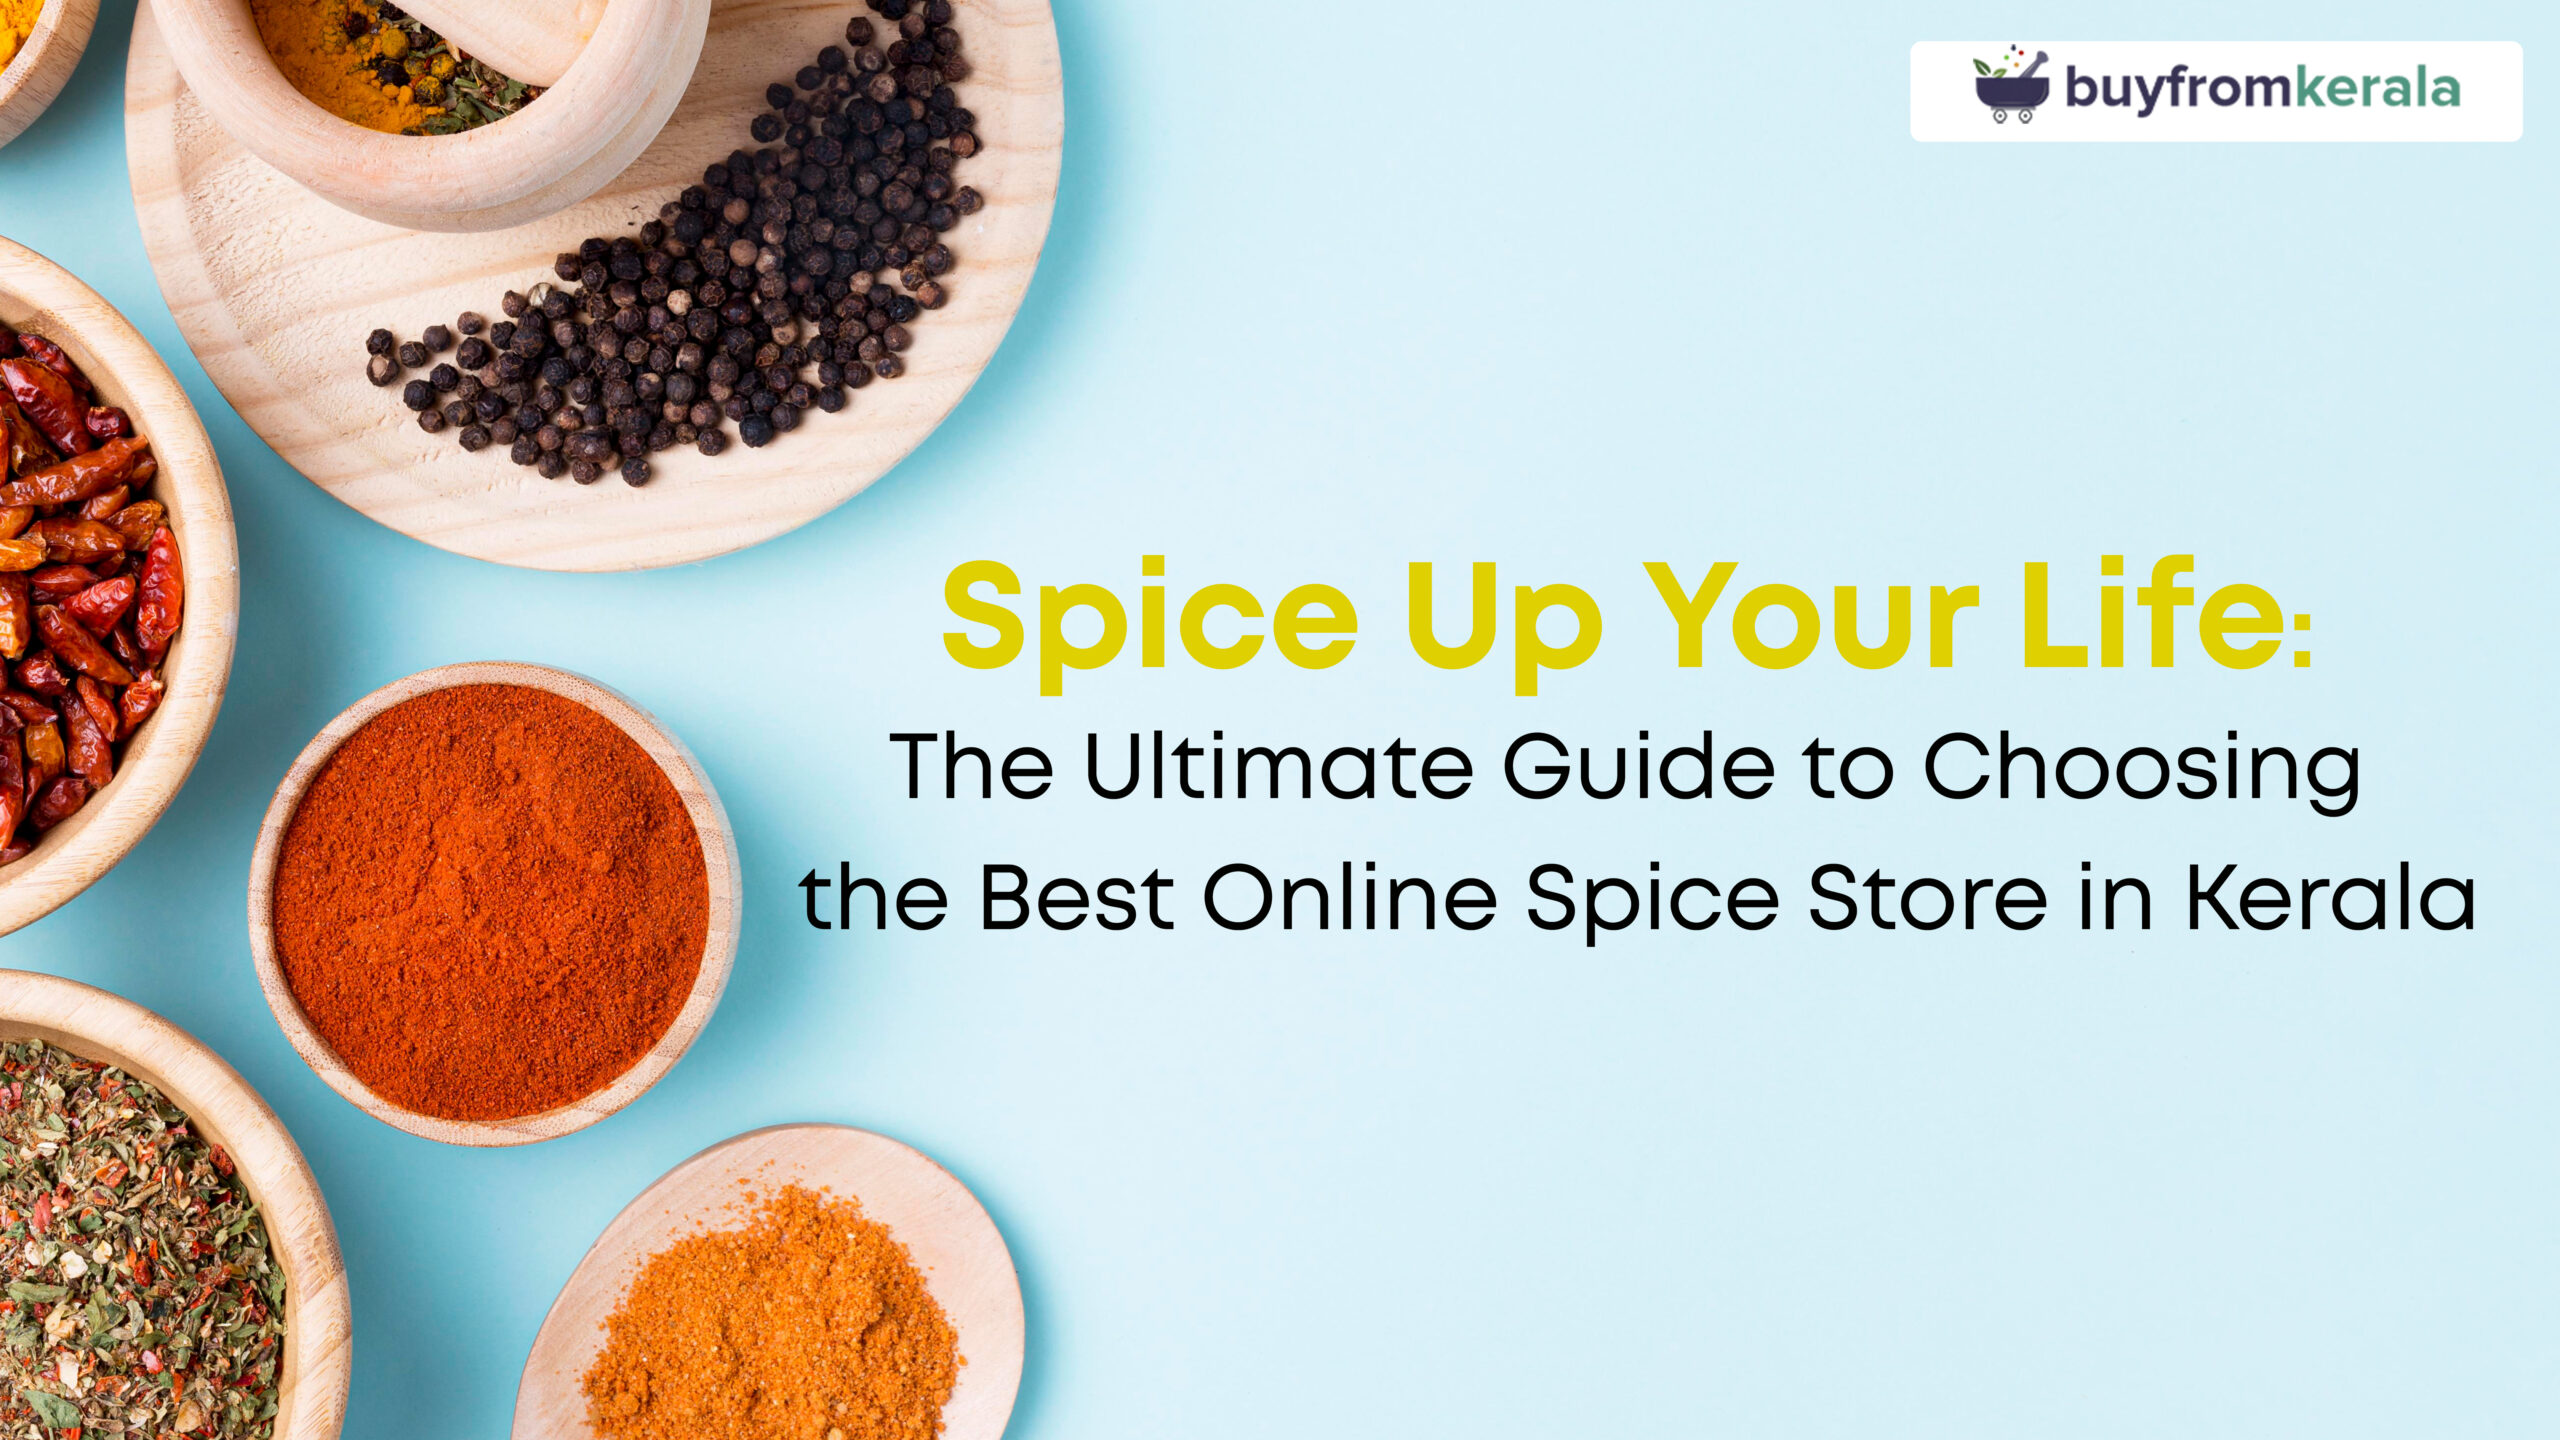 Spice Up Your Life: The Ultimate Guide to Choosing the Best Online Spice Store in Kerala